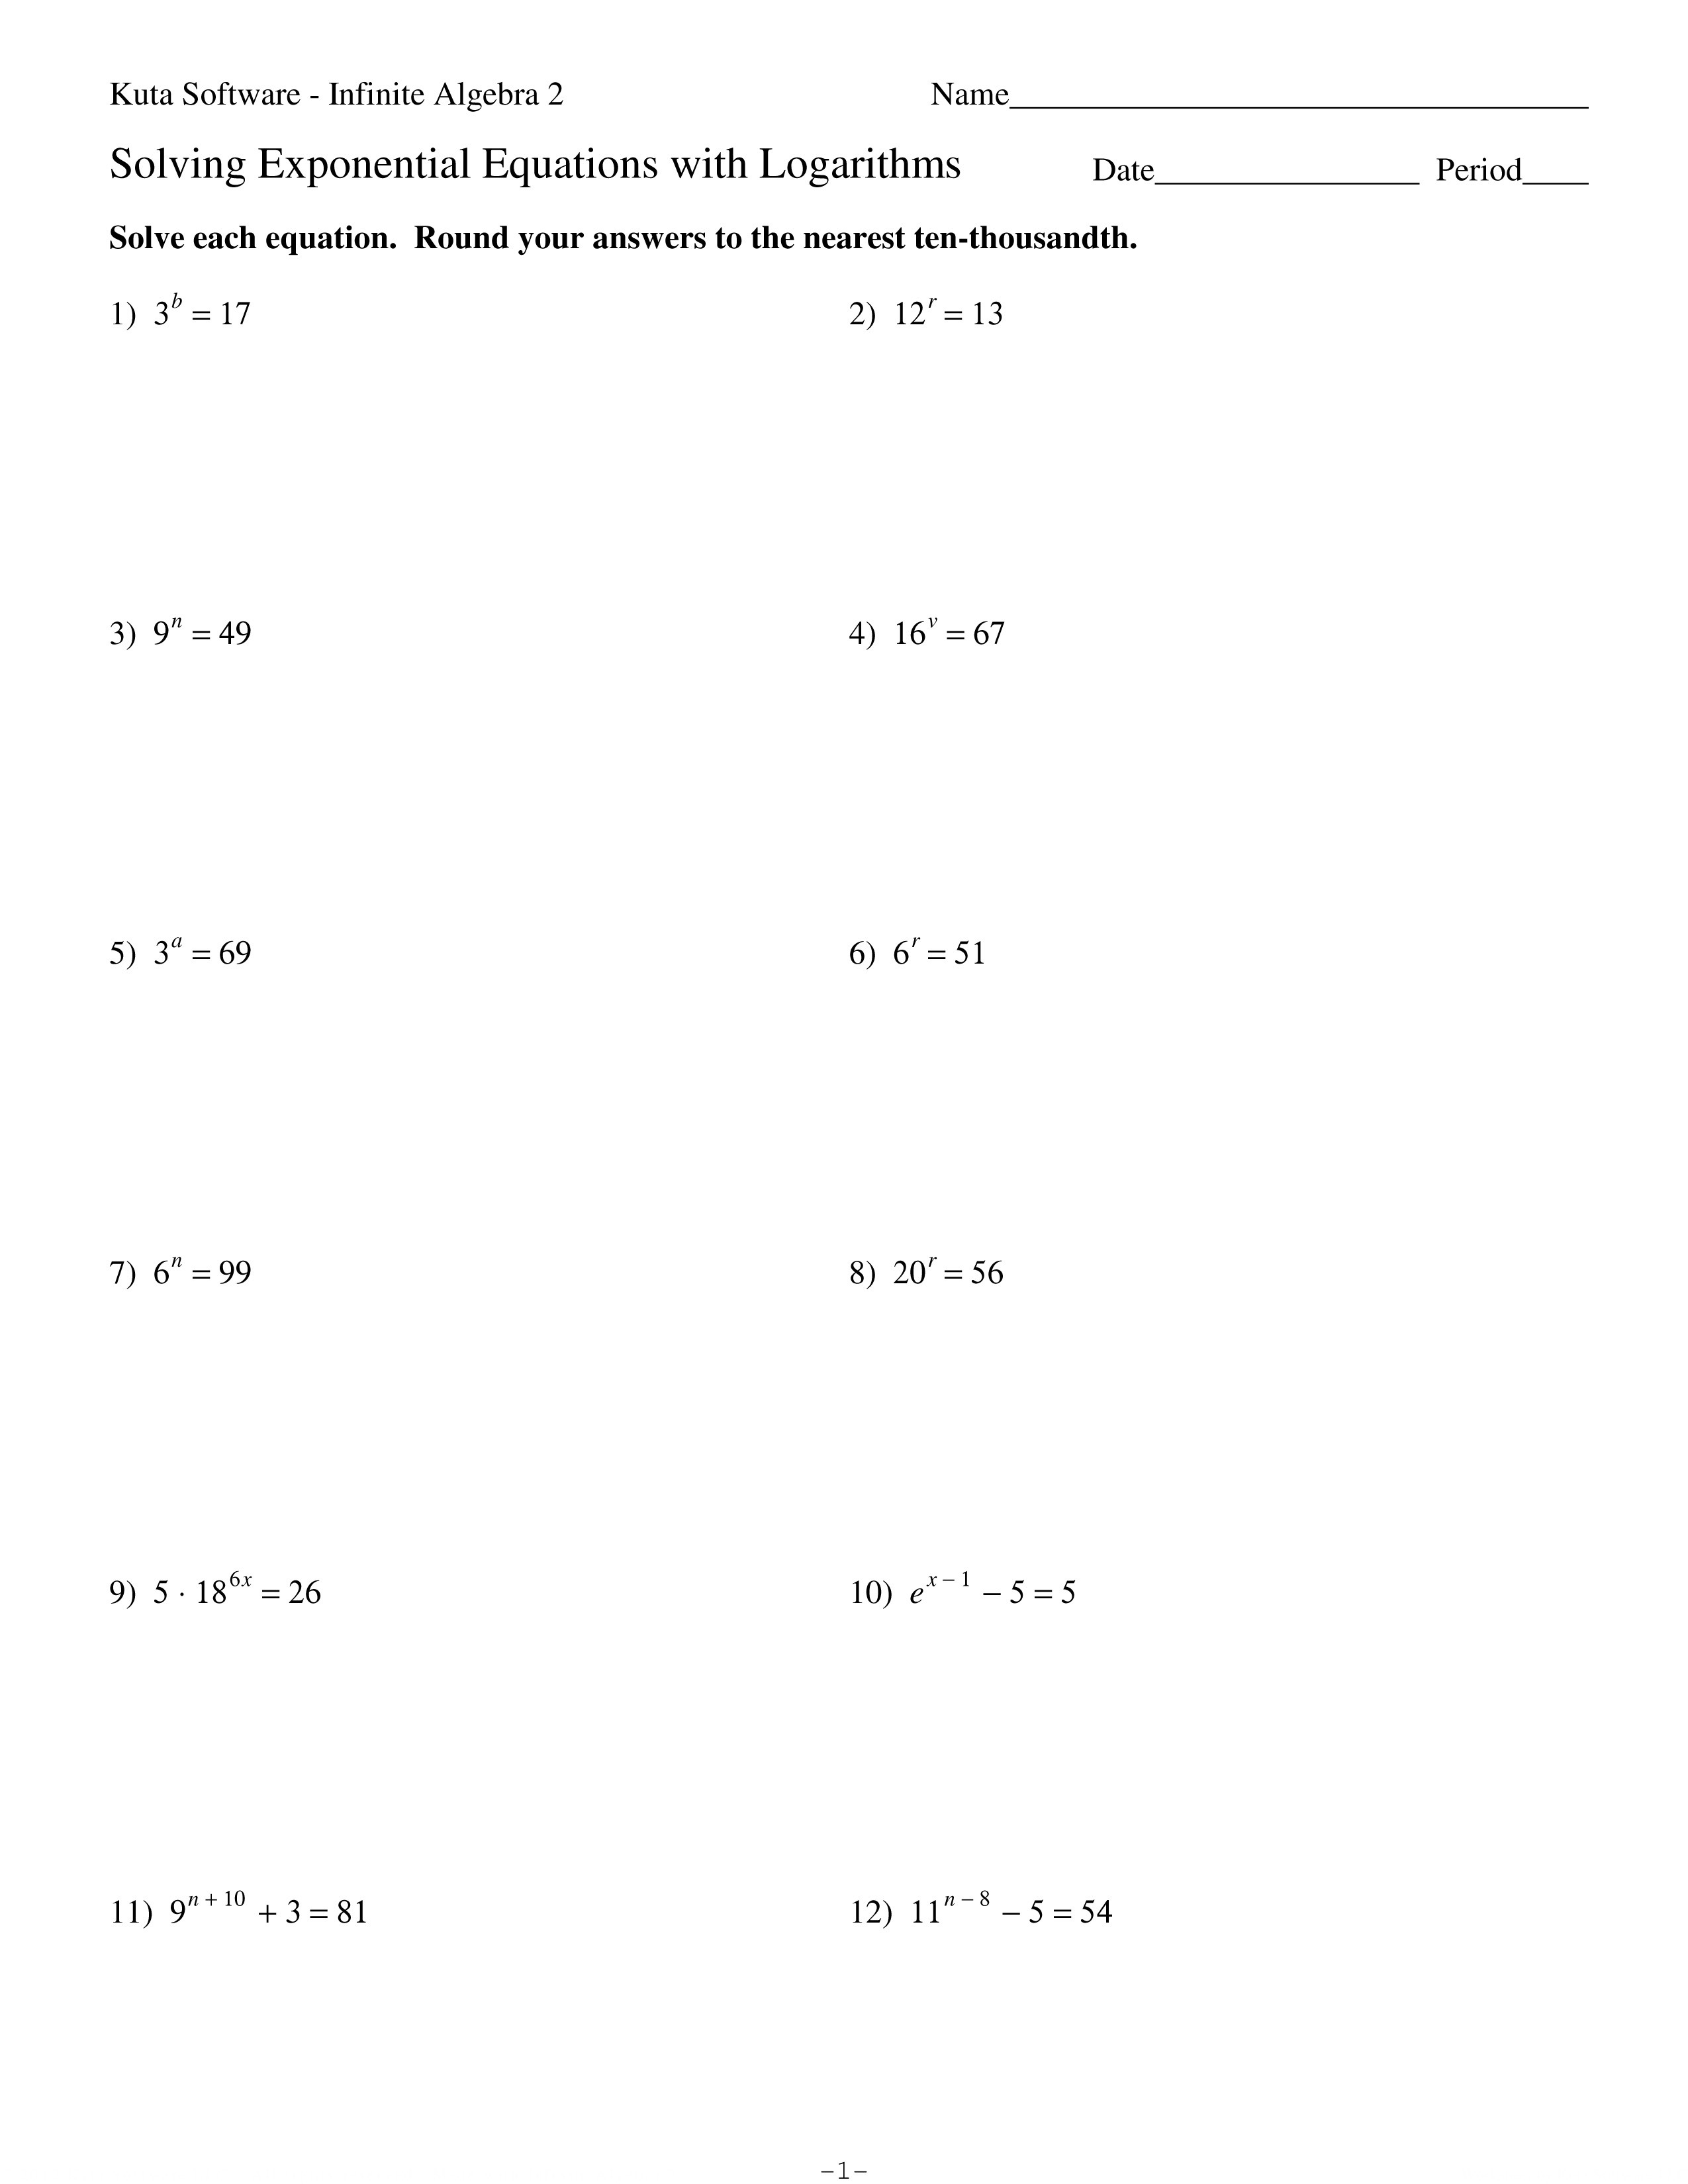 Solving Exponential Equations With Logarithms Multiple Choice Worksheet